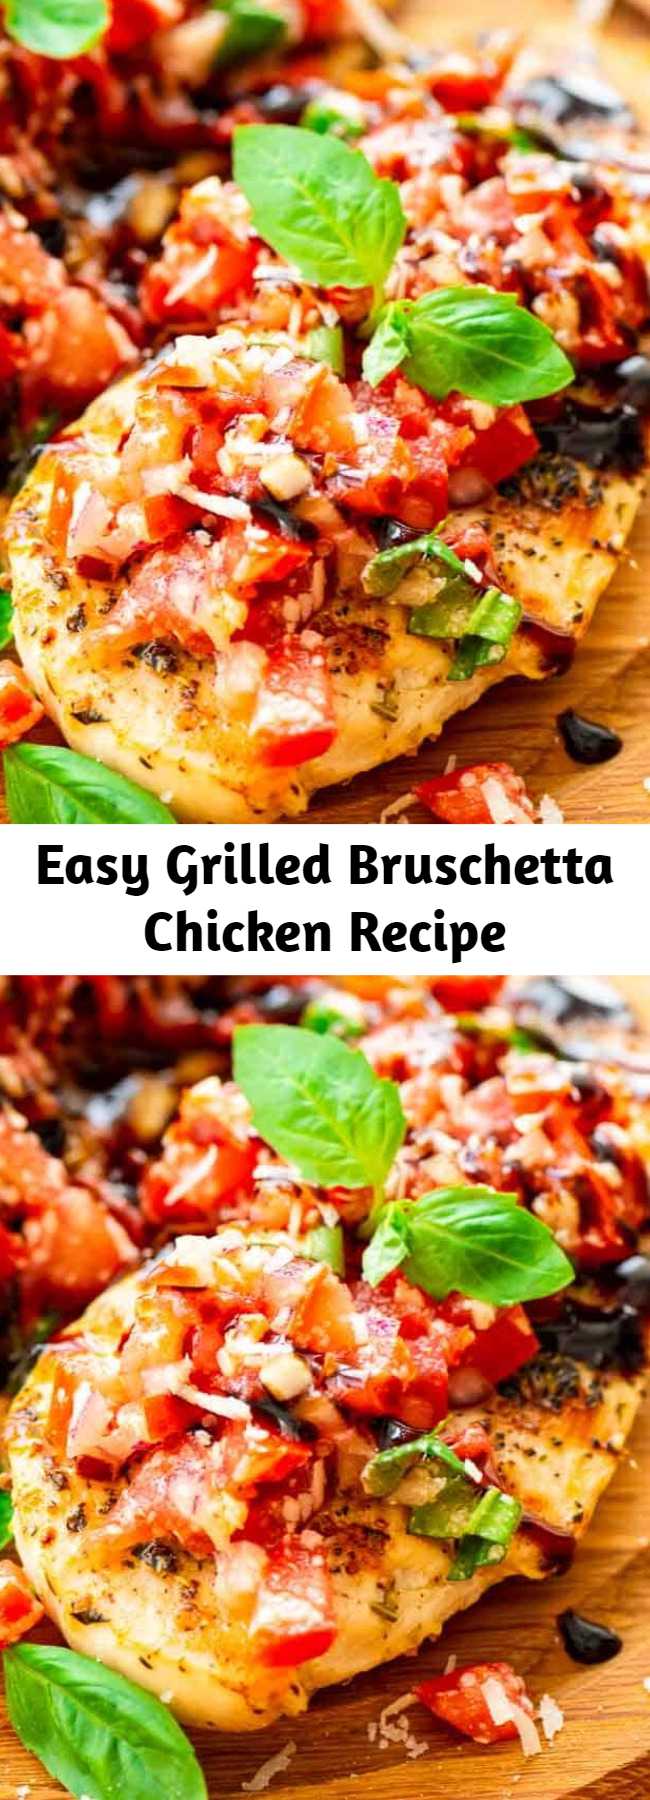 Easy Grilled Bruschetta Chicken Recipe - Quick and easy recipe made on the grill or in a grill pan! Tender, juicy chicken topped with bruschetta and a balsamic glaze! #bruschetta #recipe